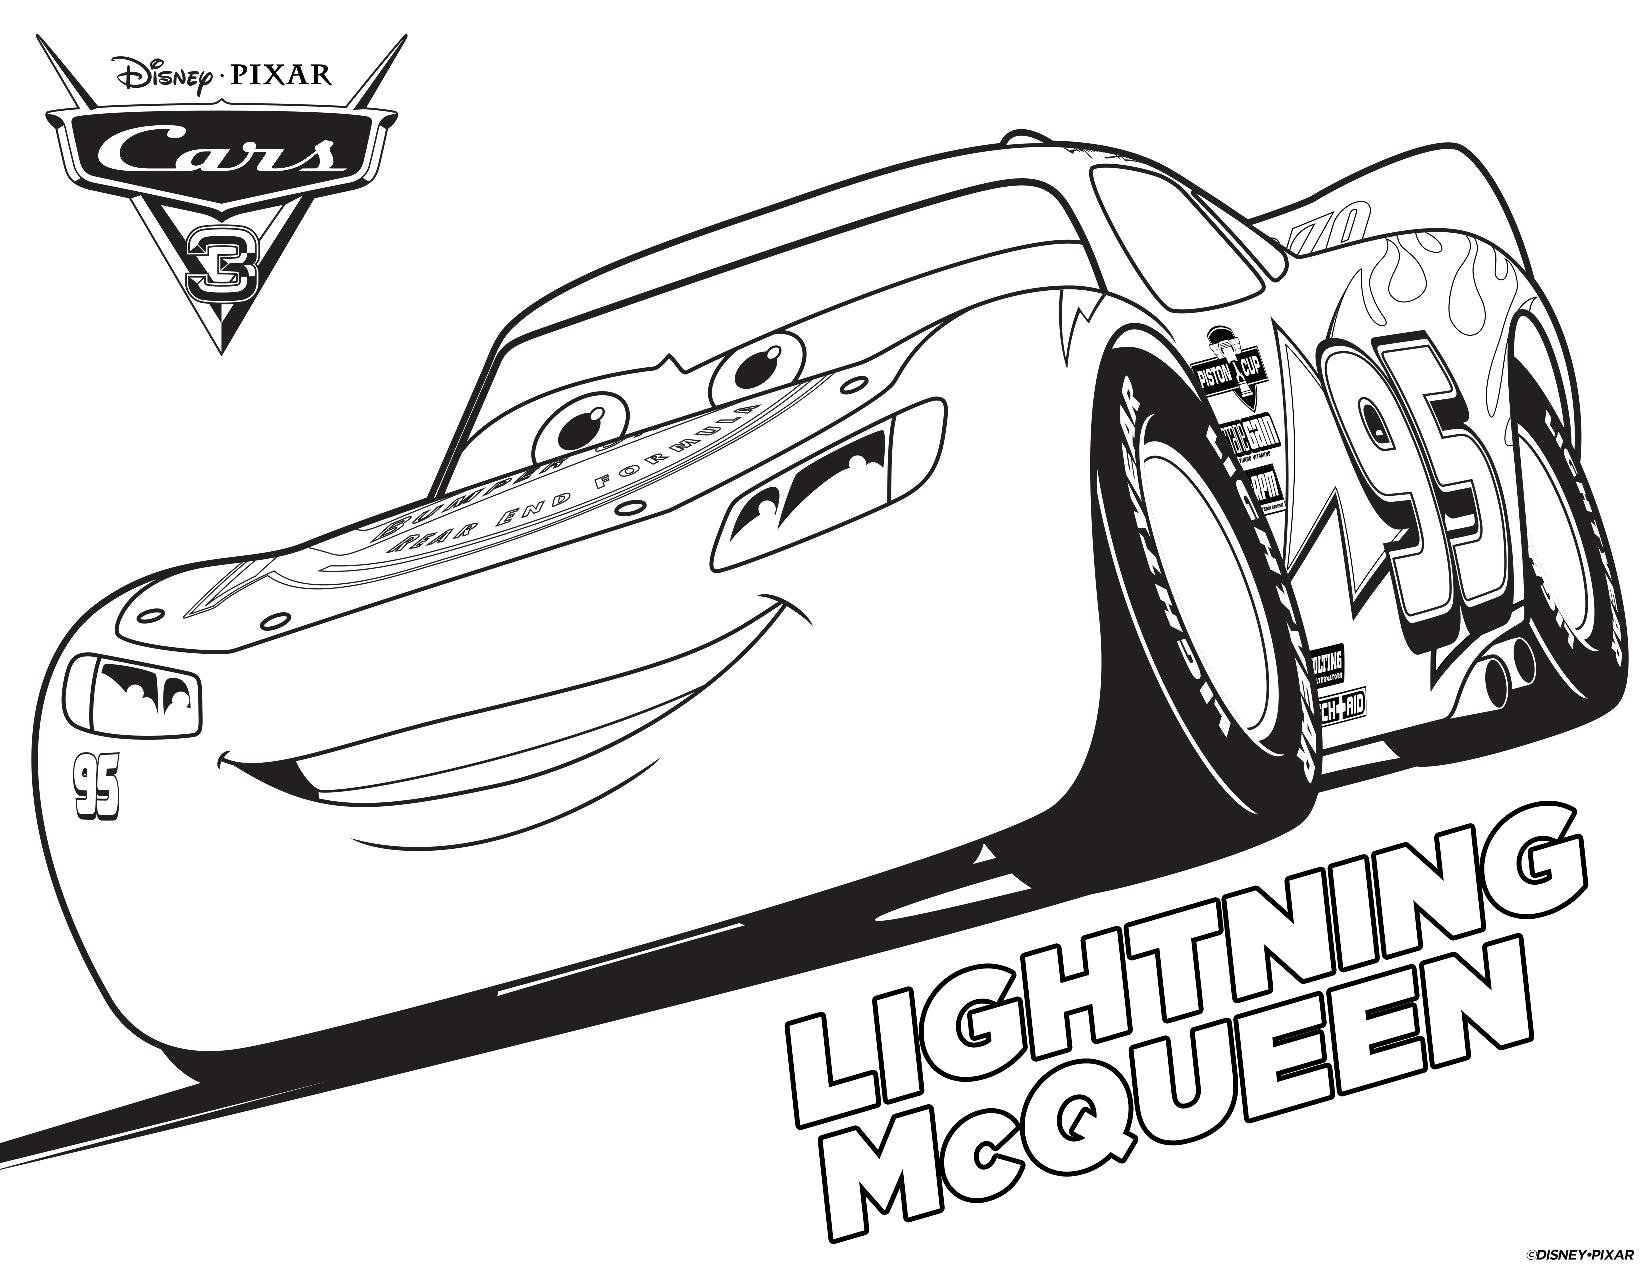 26 Lighting McQueen Coloring Pages (Free PDF Printables)